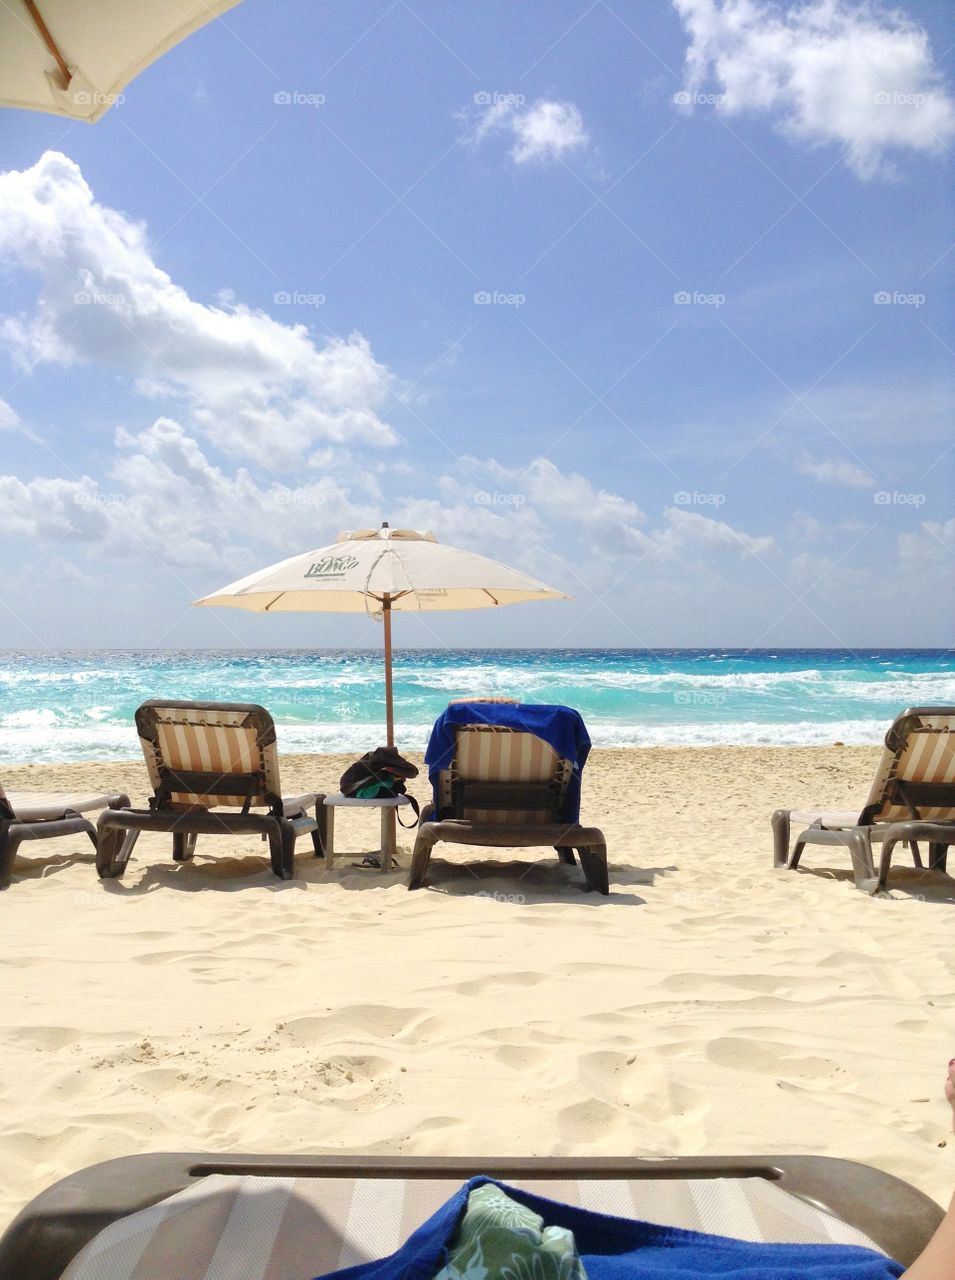 
view of the beach with white sand and blue sea, plush umbrellas and sun loungers.